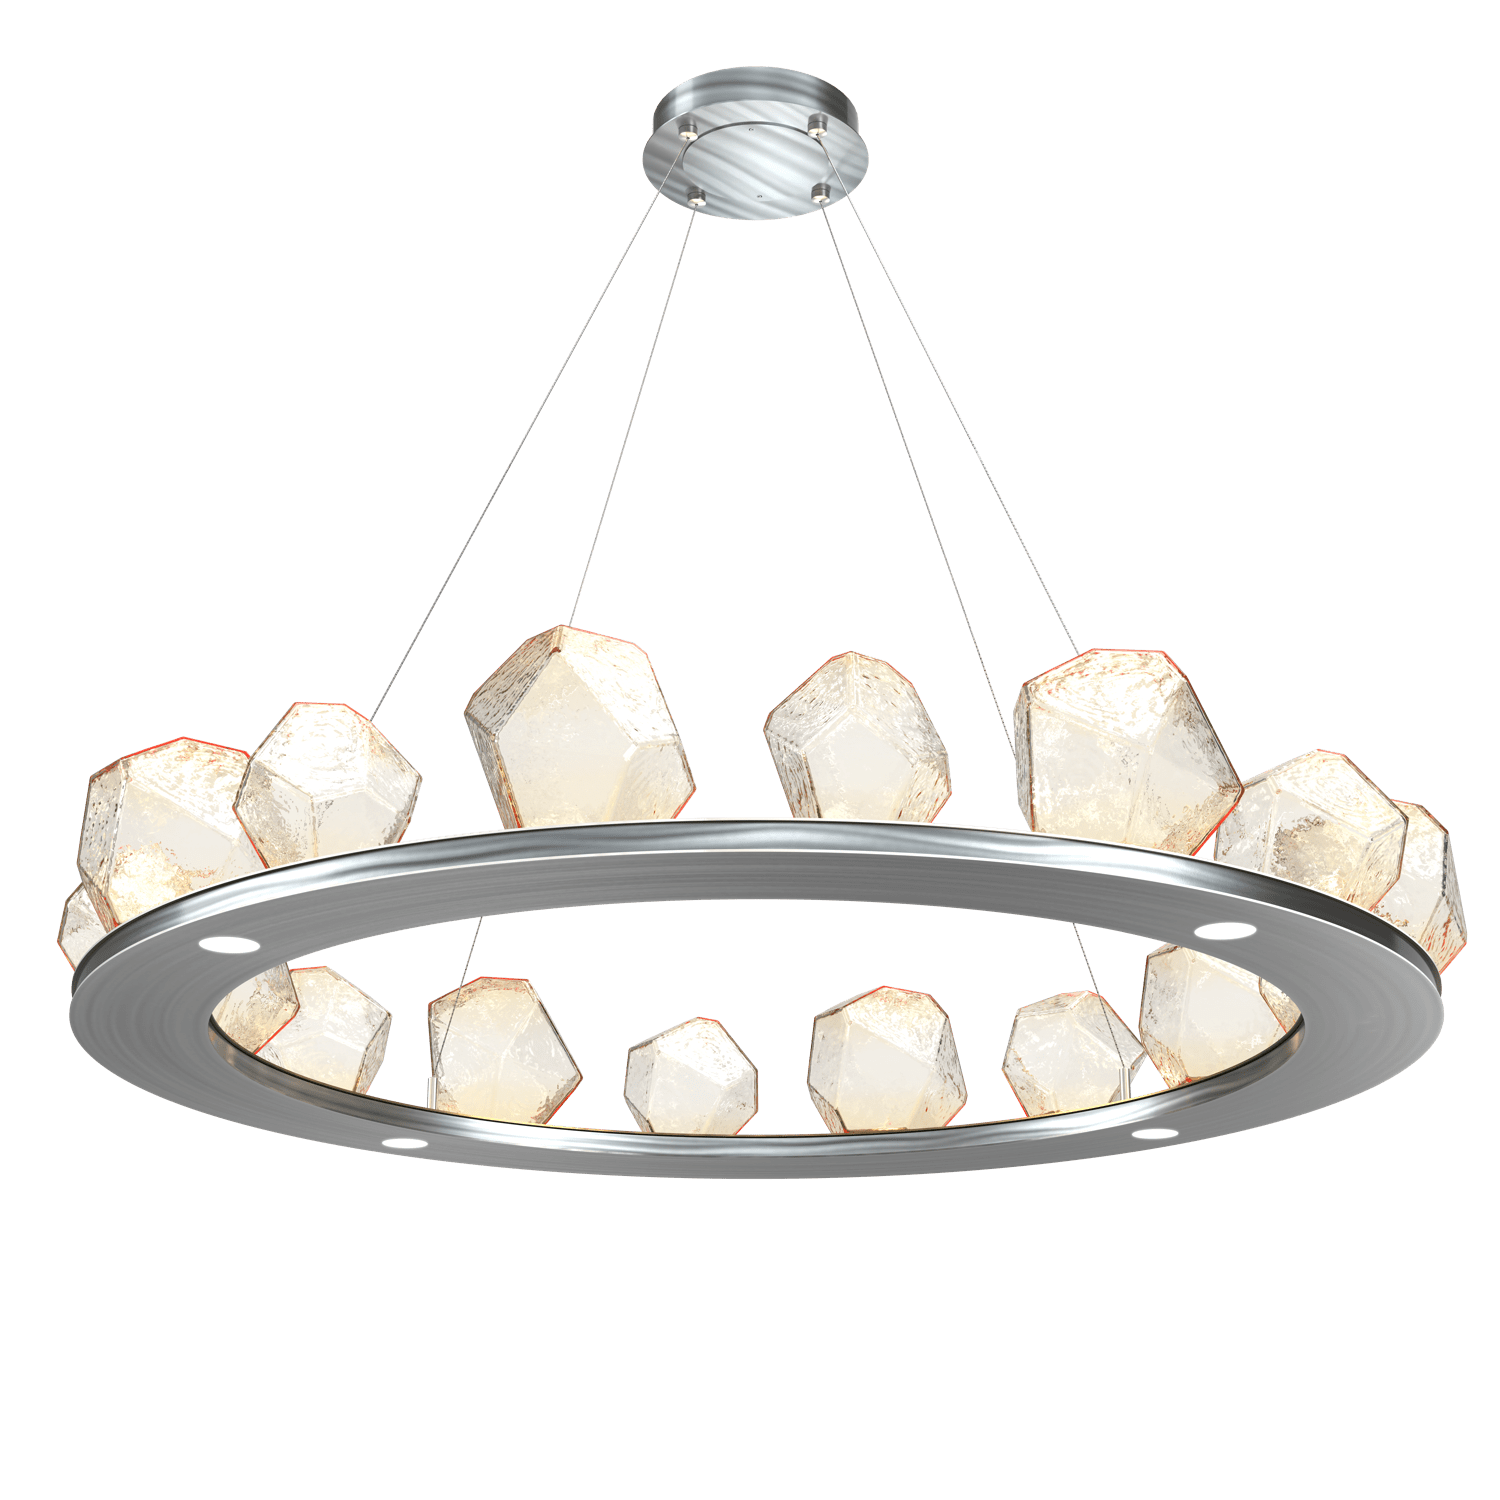 CHB0039-0D-SN-A-Hammerton-Studio-Gem-48-inch-ring-chandelier-with-satin-nickel-finish-and-amber-blown-glass-shades-and-LED-lamping